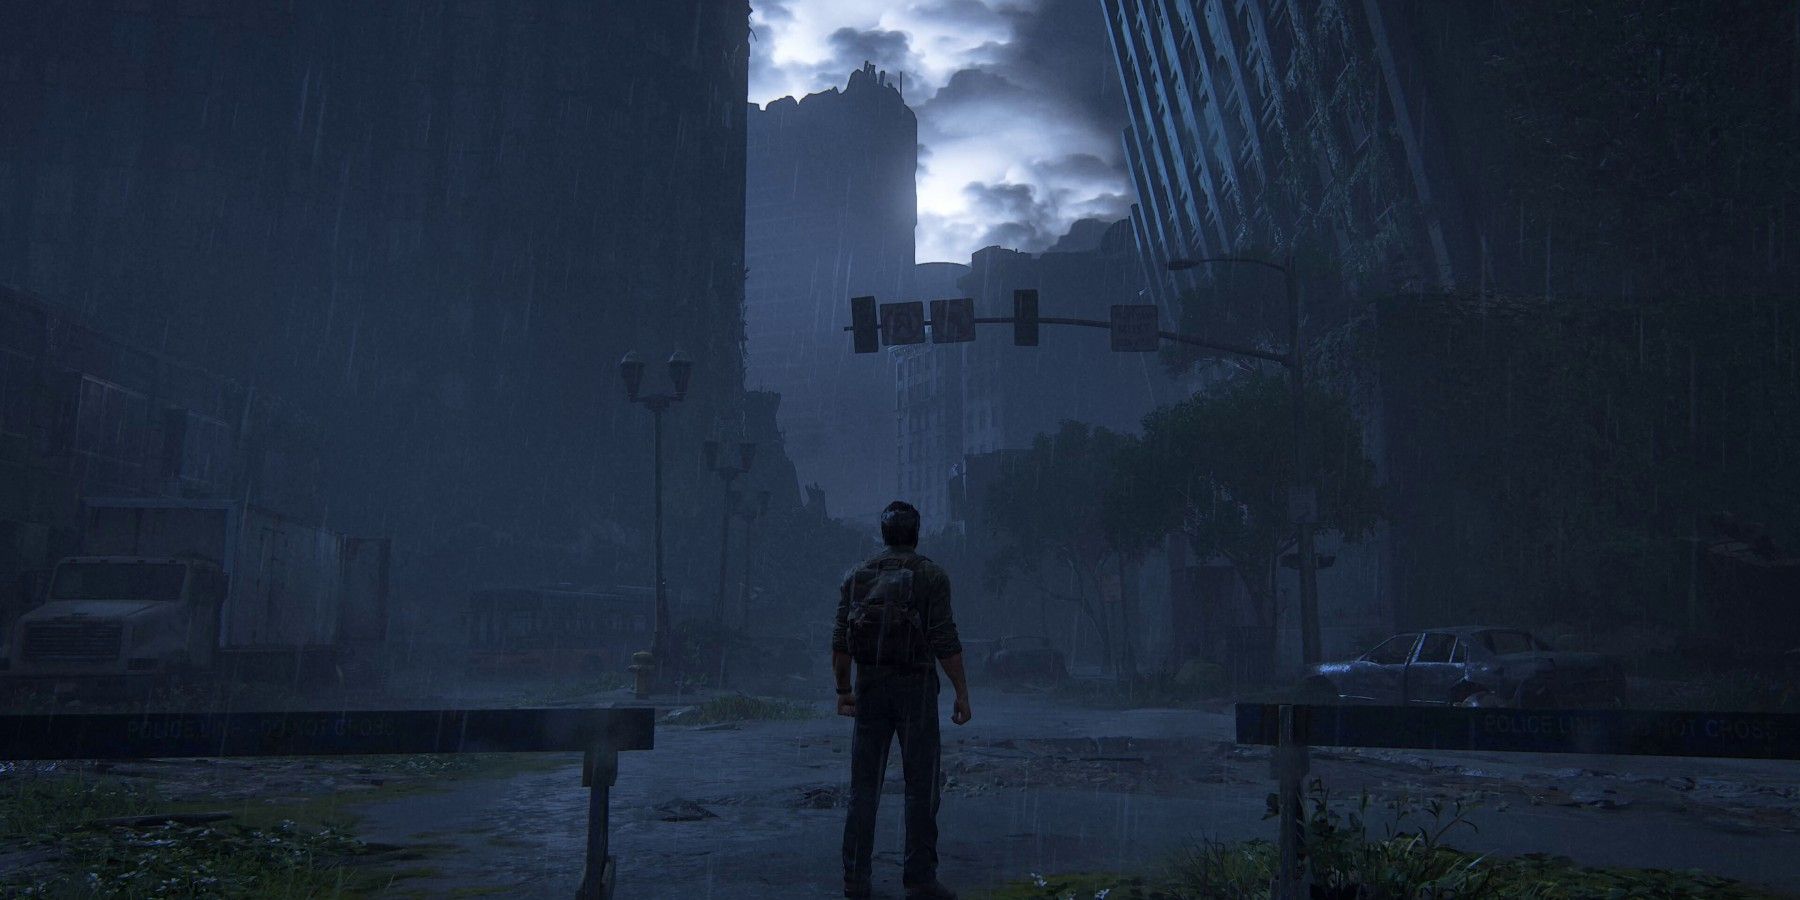 The Last of Us Part 1 PC Port Gets New Patch